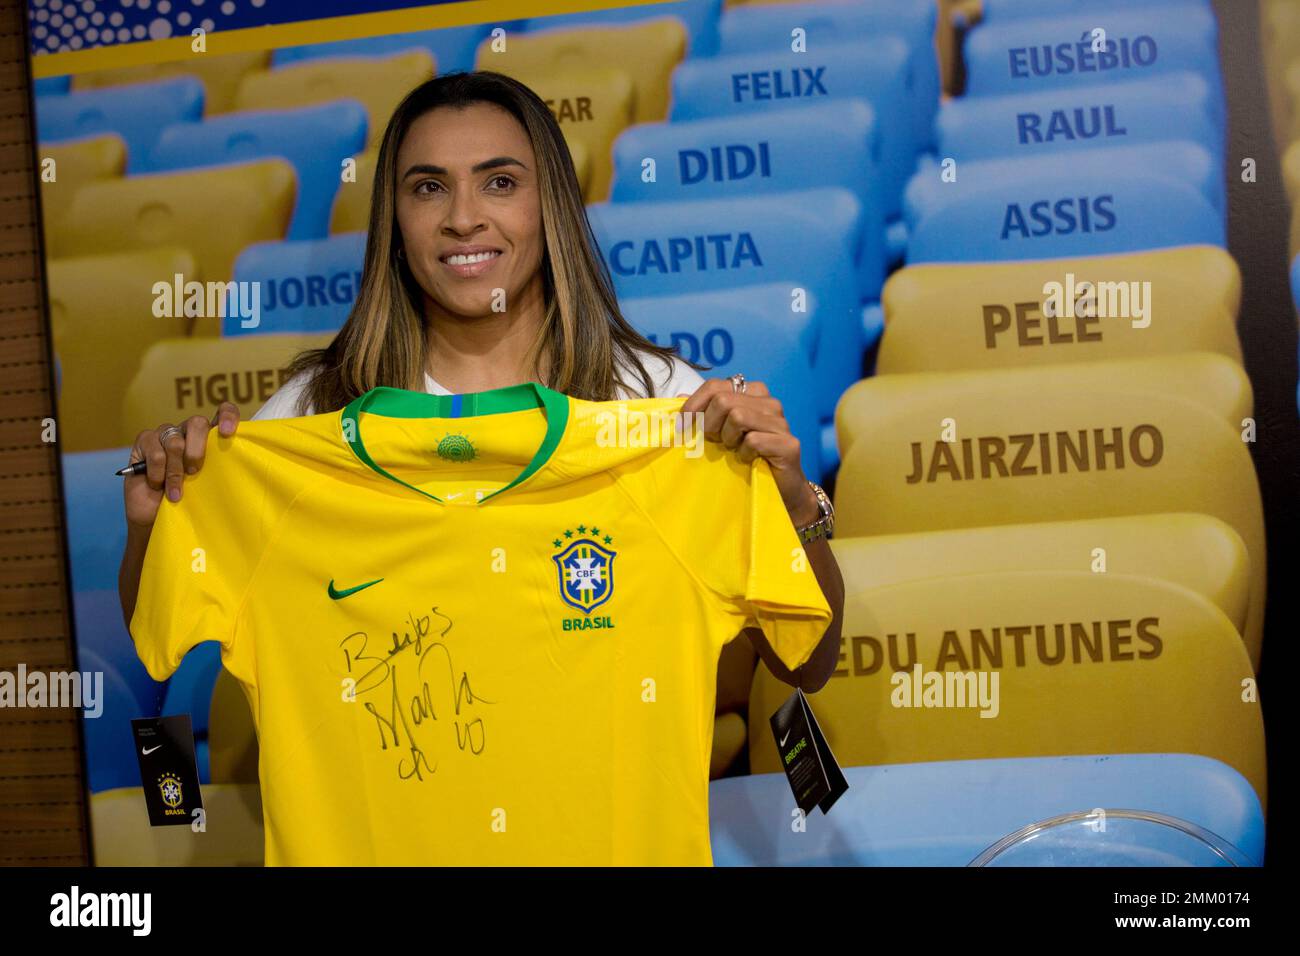 Brazil's Marta holds a Brazil's national jersey before making footprints of  her feet that will be placed on Brazil's Soccer Walk of Fame at the  Maracana stadium in Rio de Janeiro, Brazil